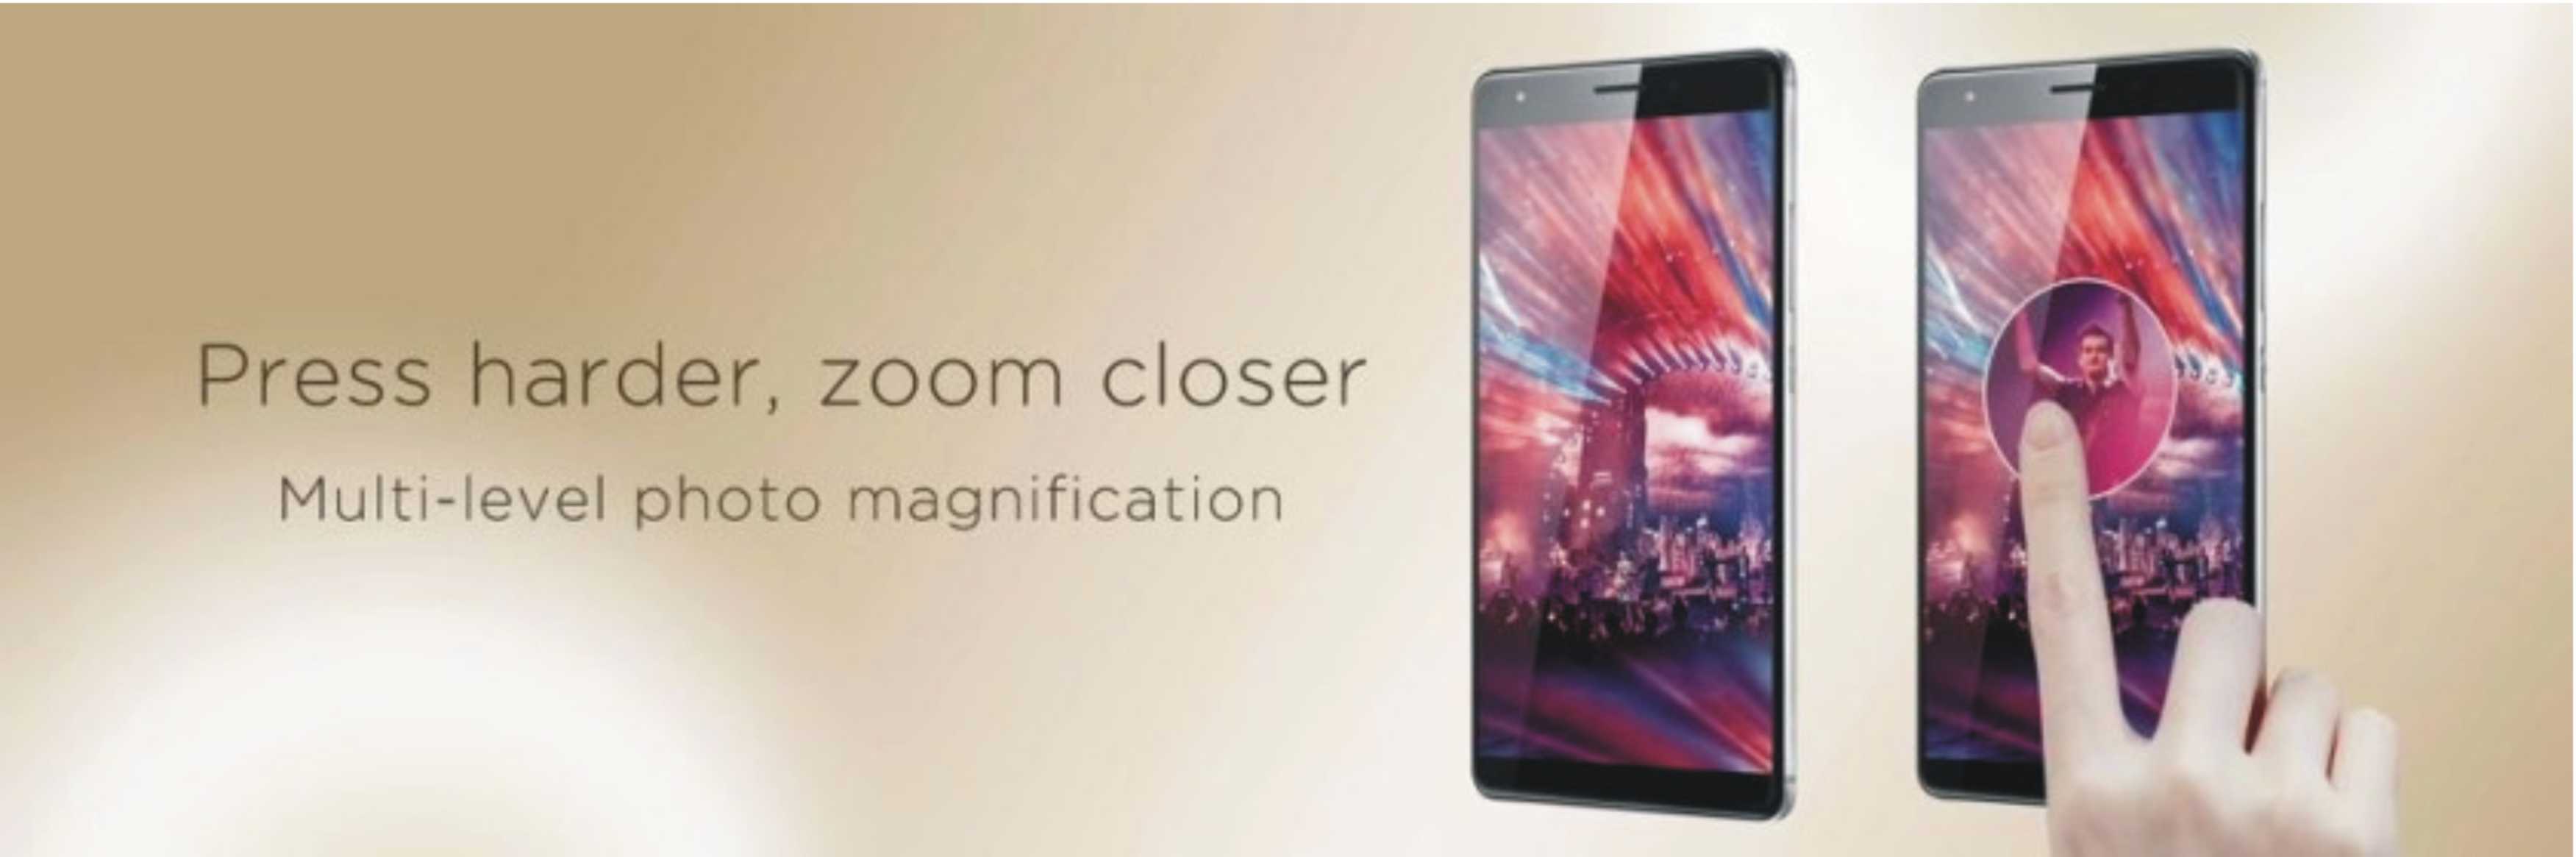 Huawei Mate S Brings Unconventional Ways